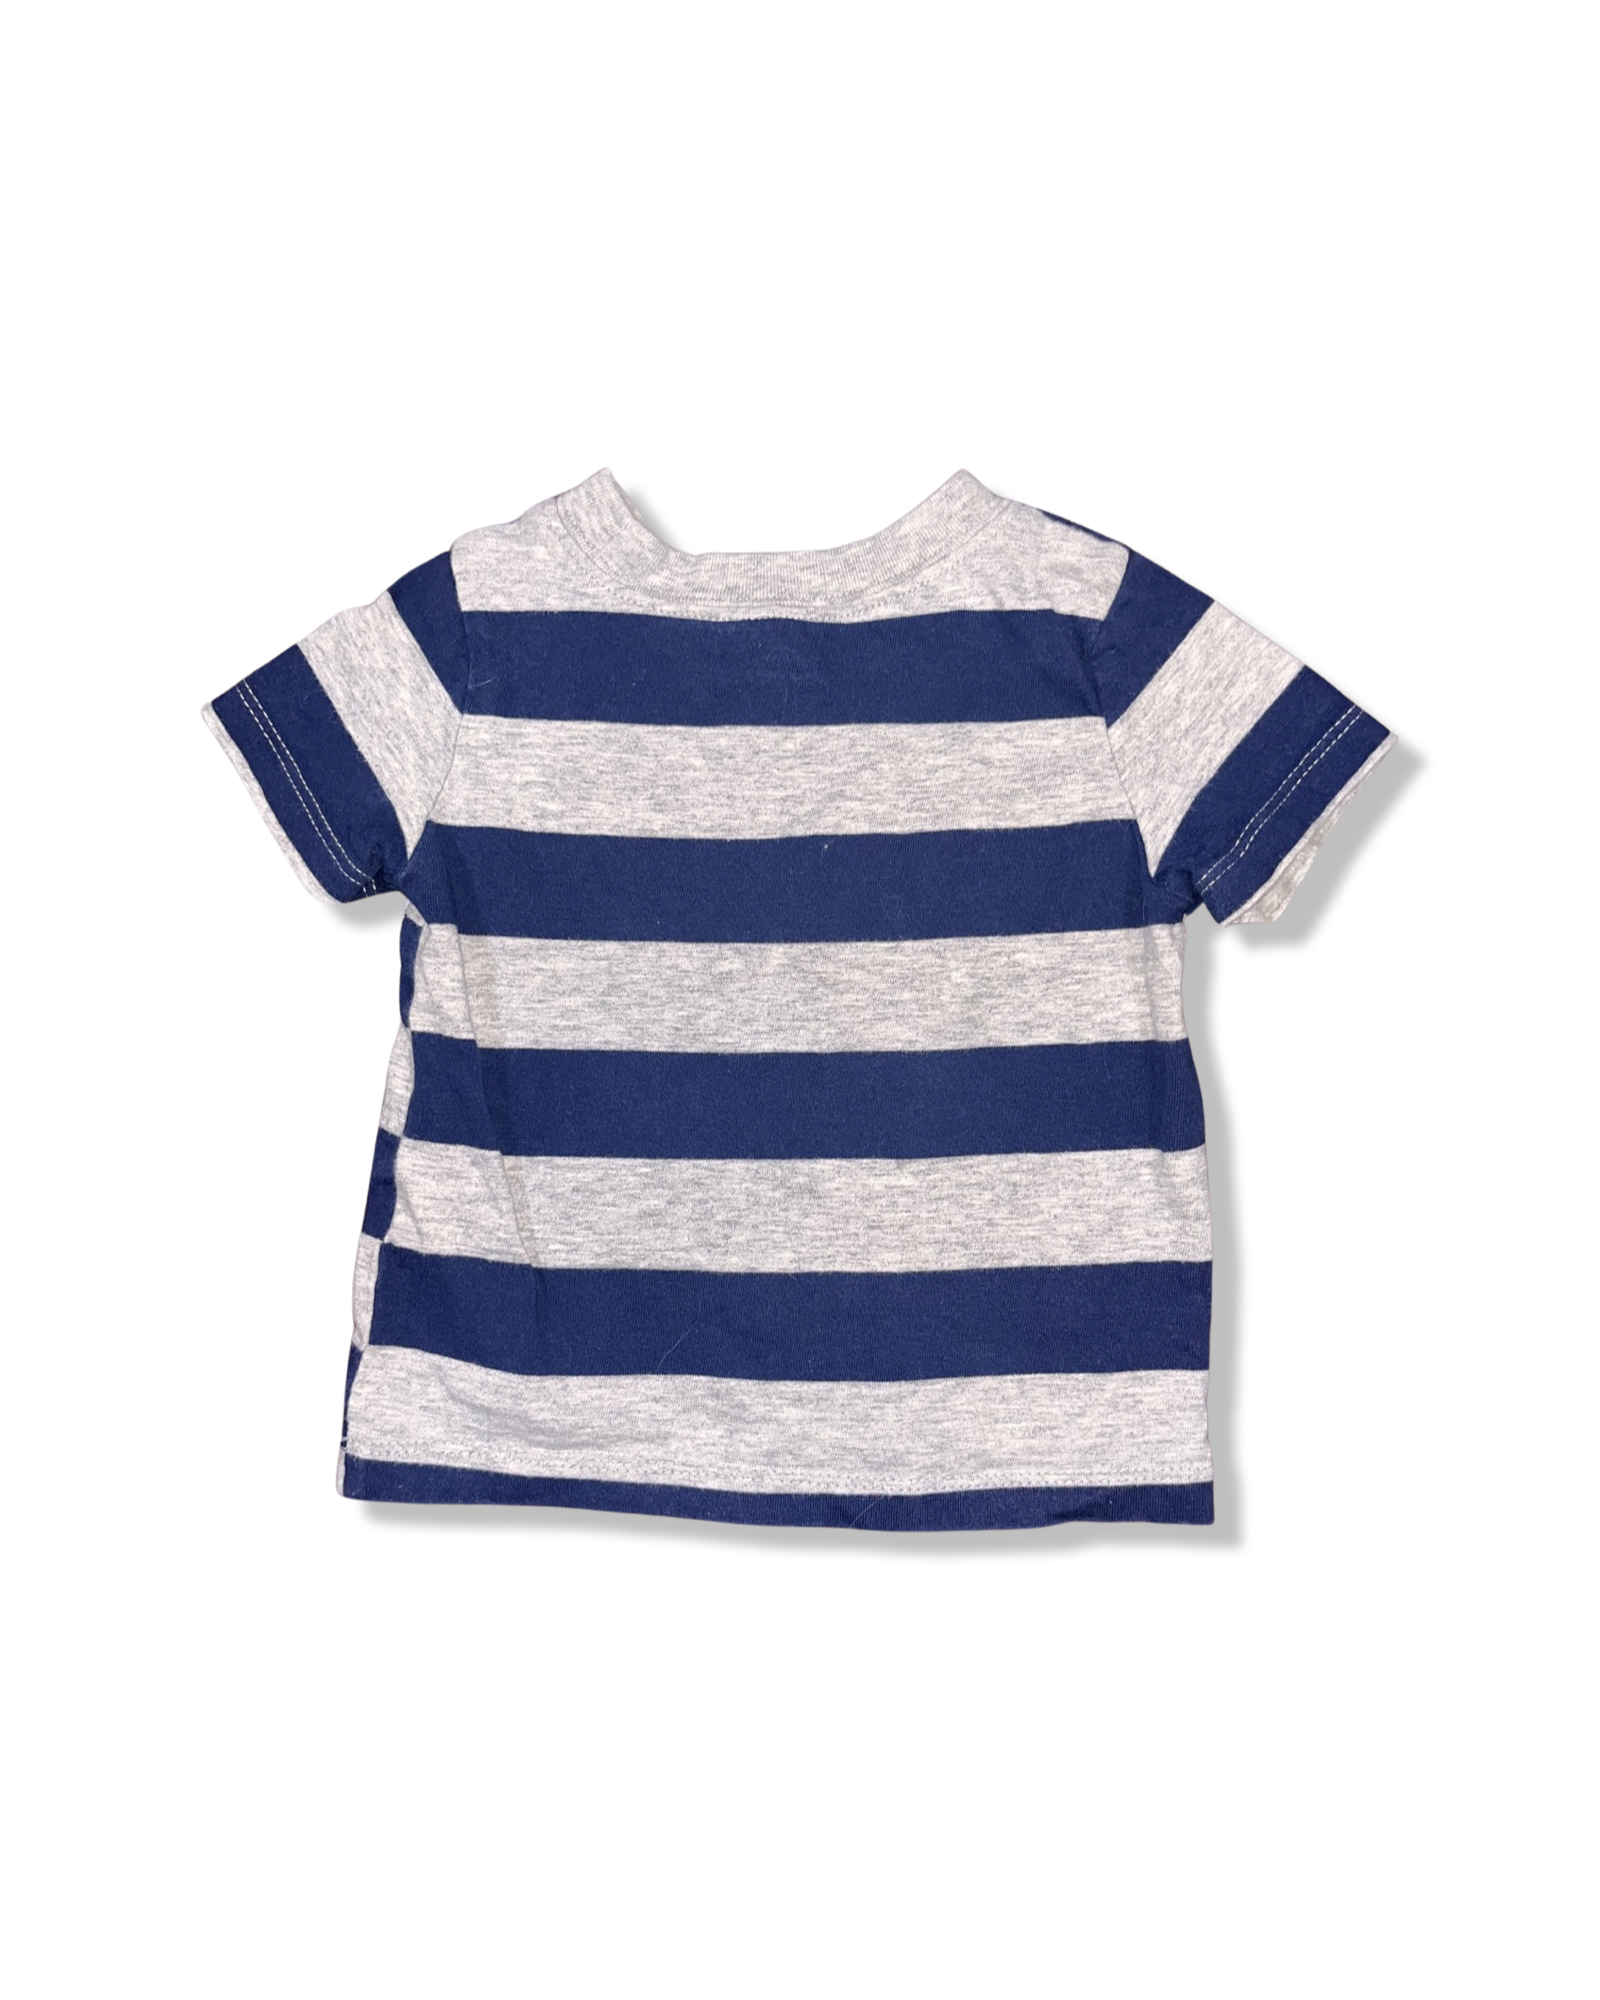 Carter's Grey and Blue Striped T-shirt (9M)